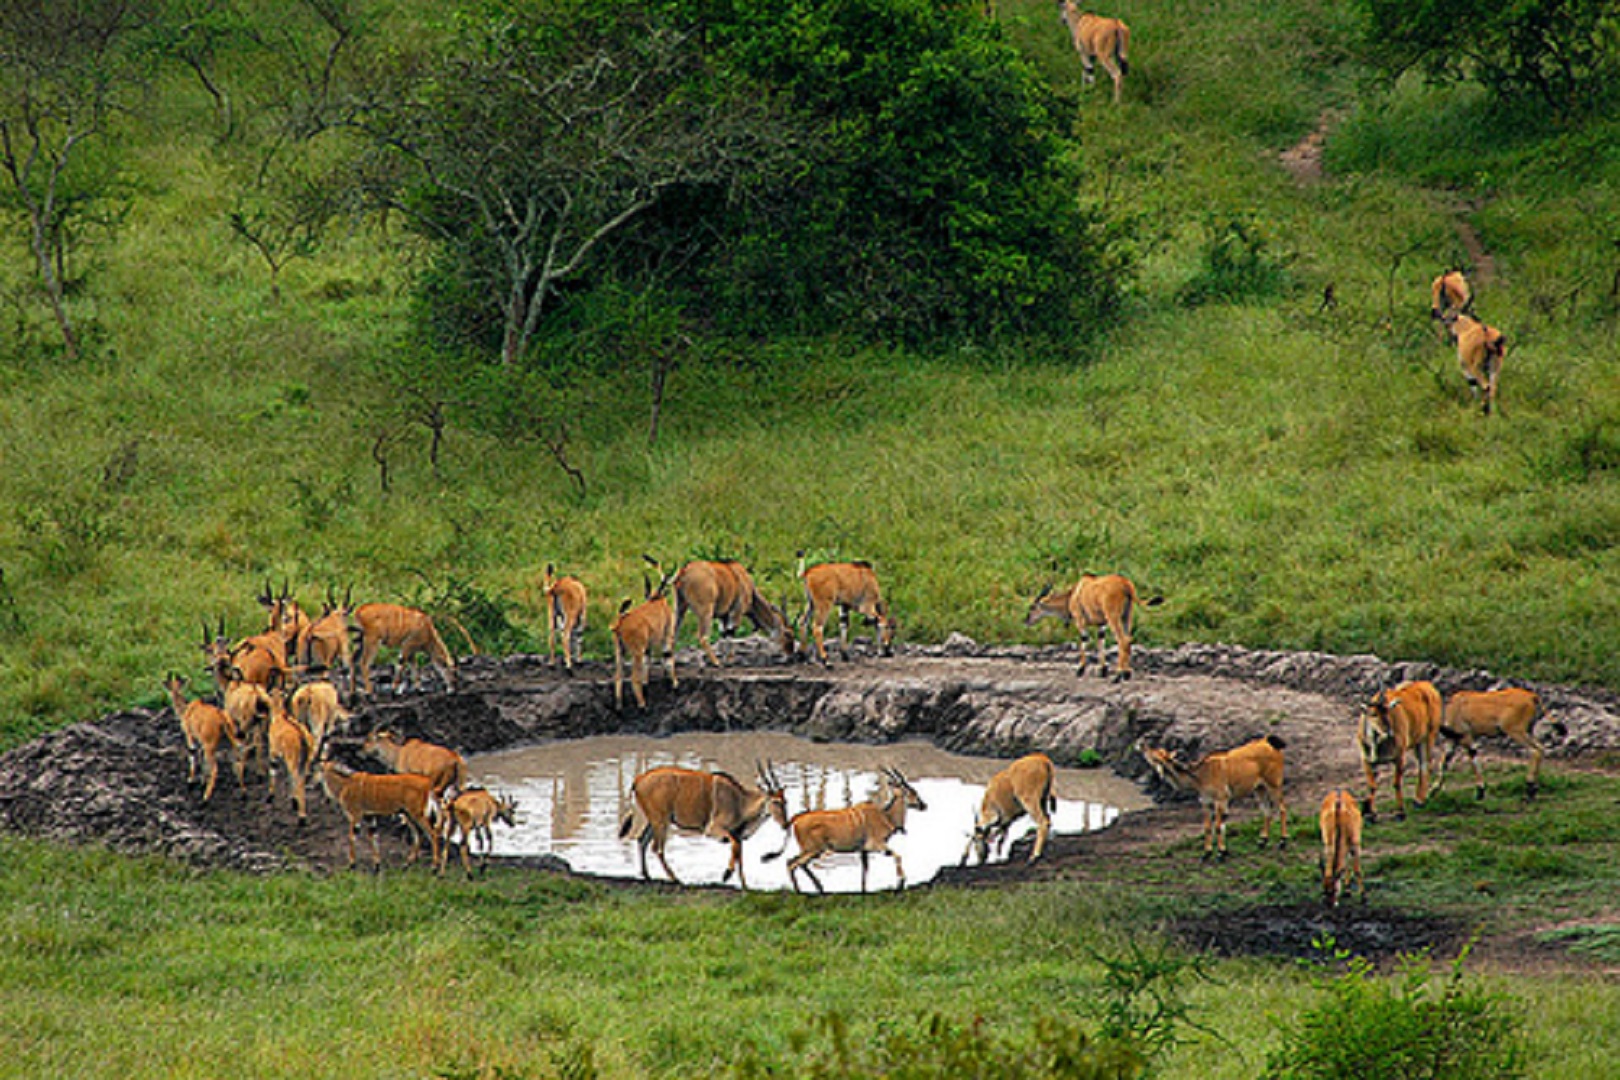 A number of antelopes as seen at one of the salt-licking areas in Lake Mburo National Park.